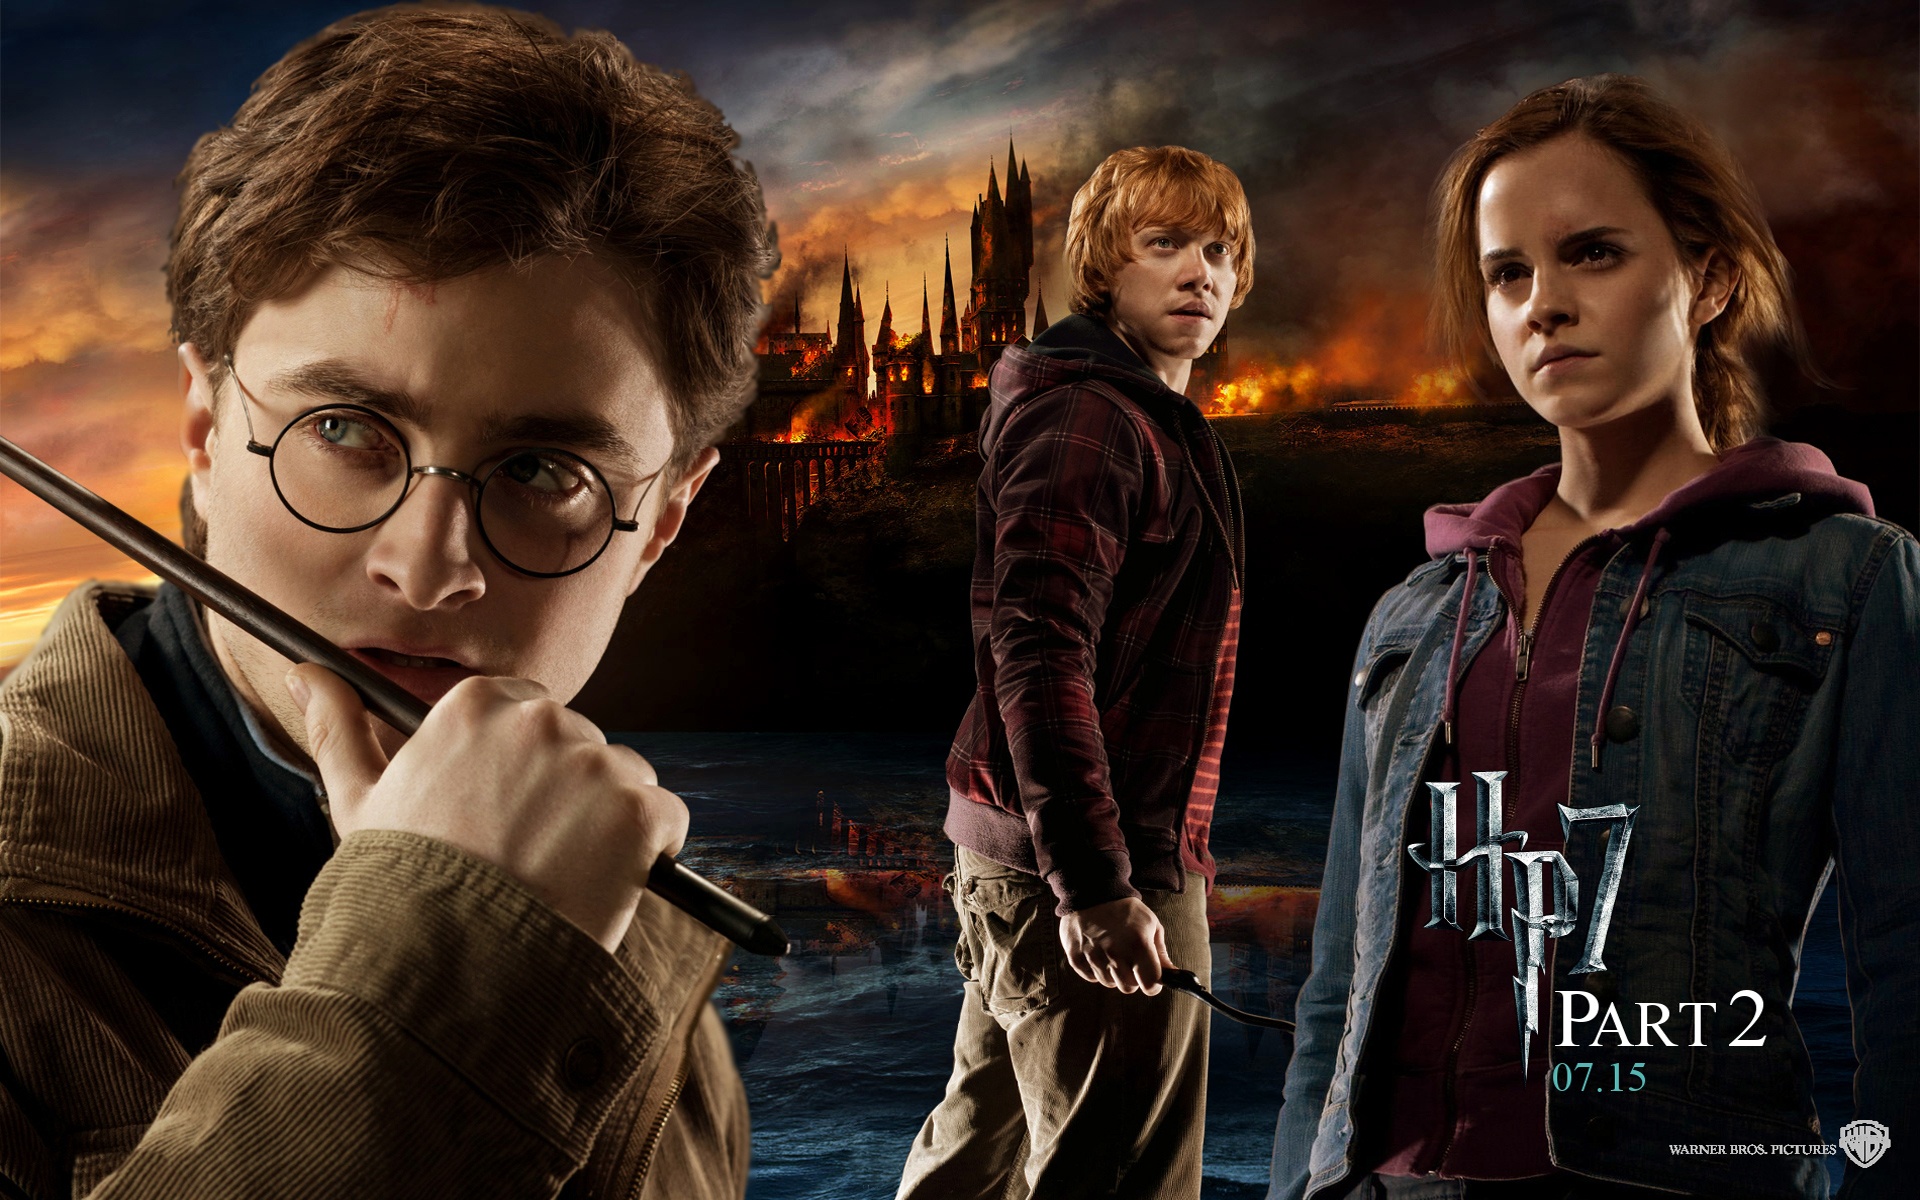 Harry potter and the deathly hallows part 2 in Hindi